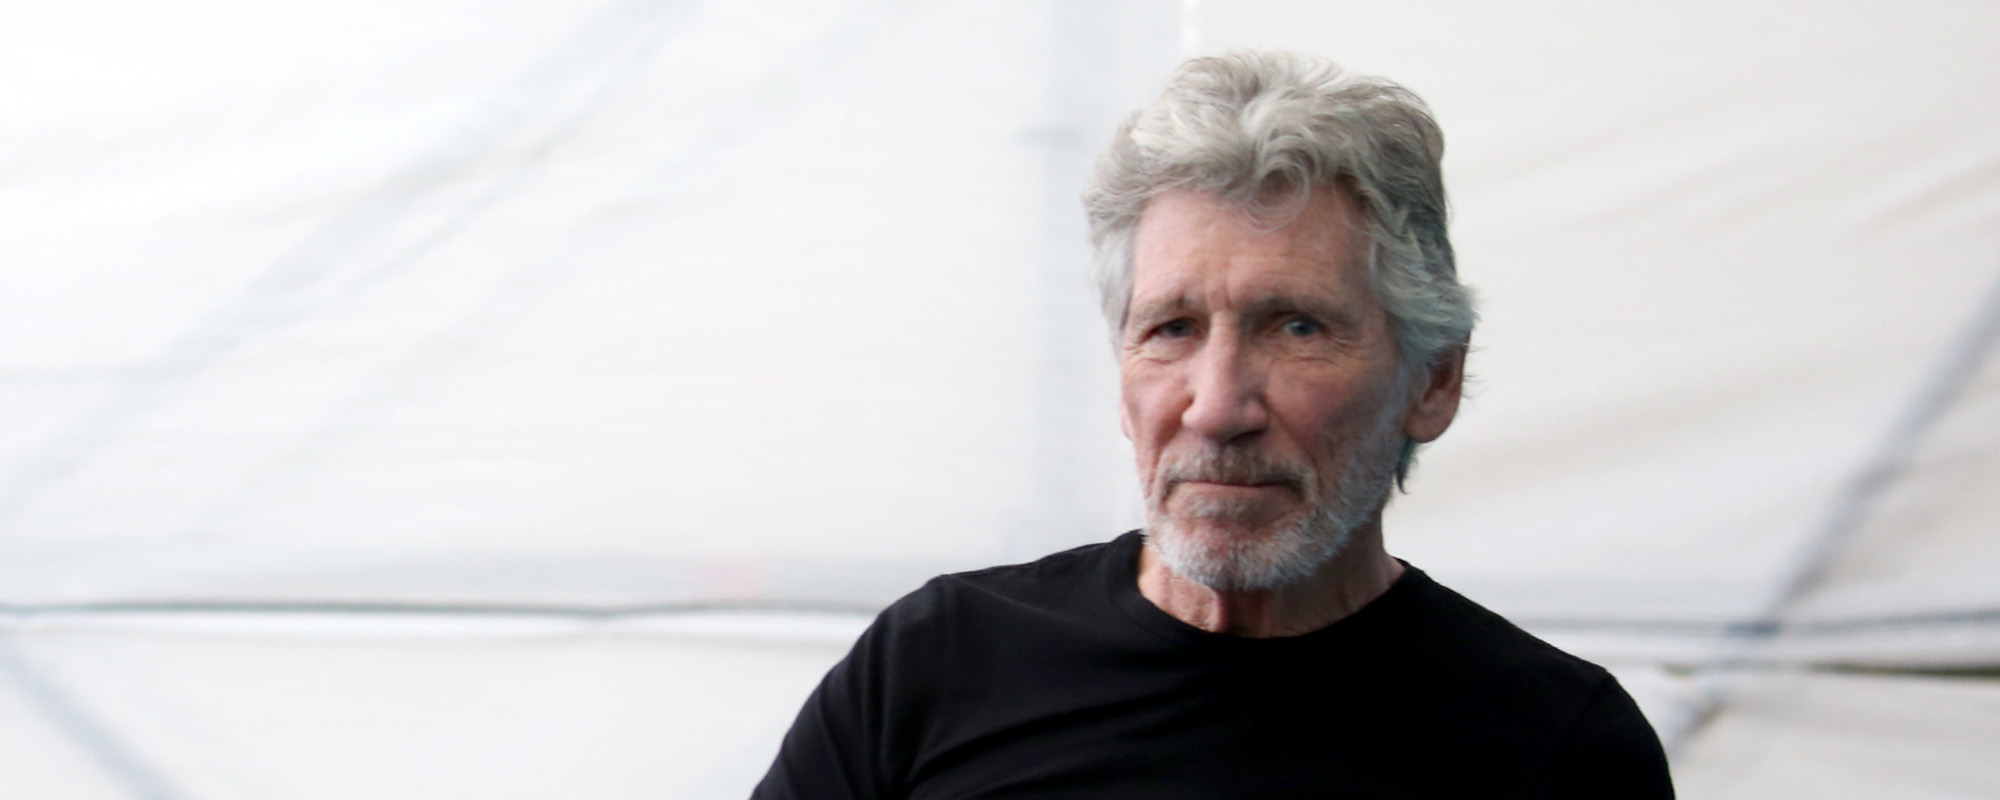 Roger Waters Responds to 19-Year-Old Ukrainian Girl Asking Him to Speak Out: Invasion is “Act of a Gangster”